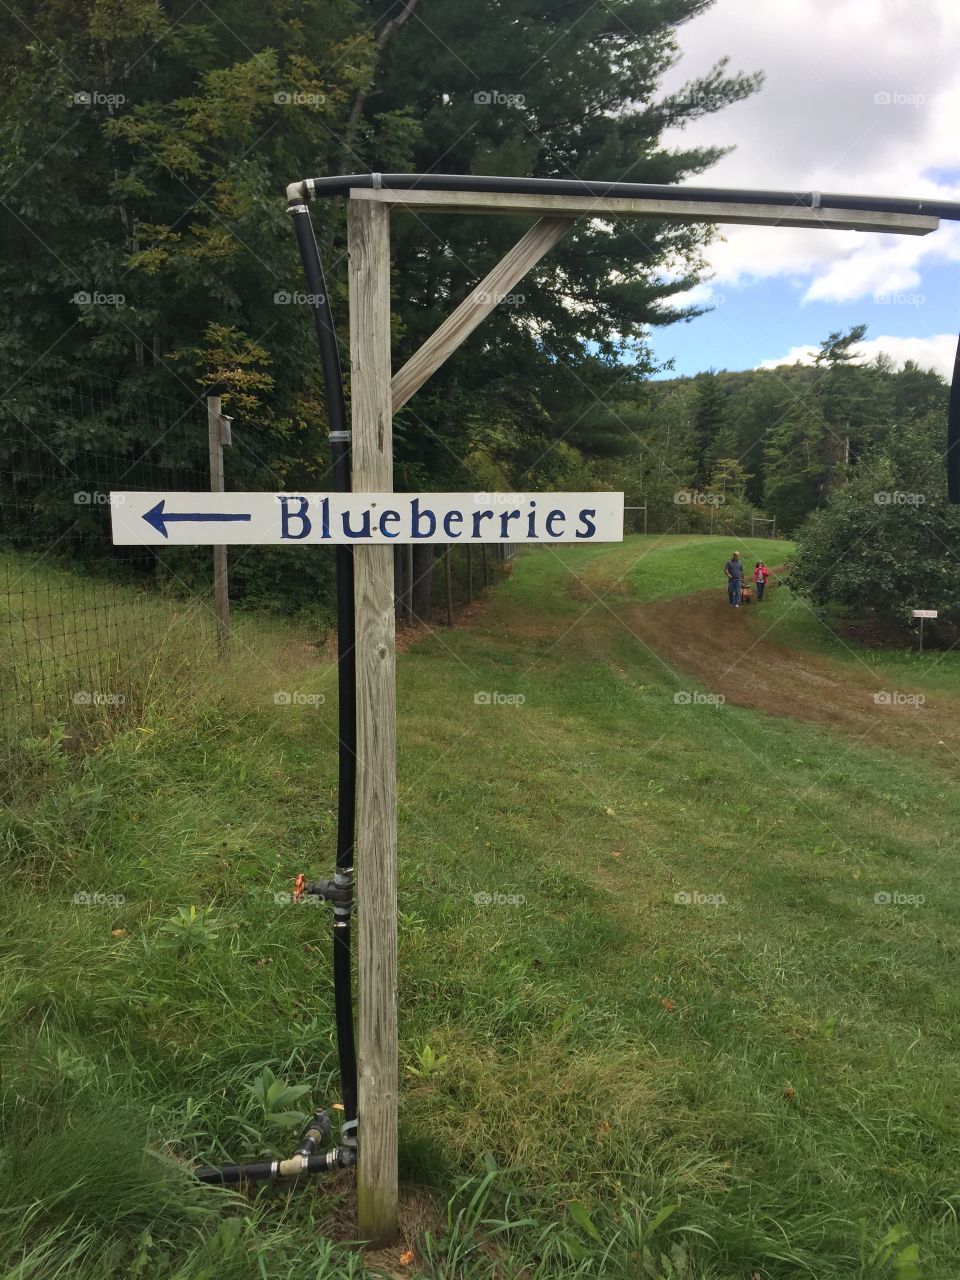 Blueberries that way!